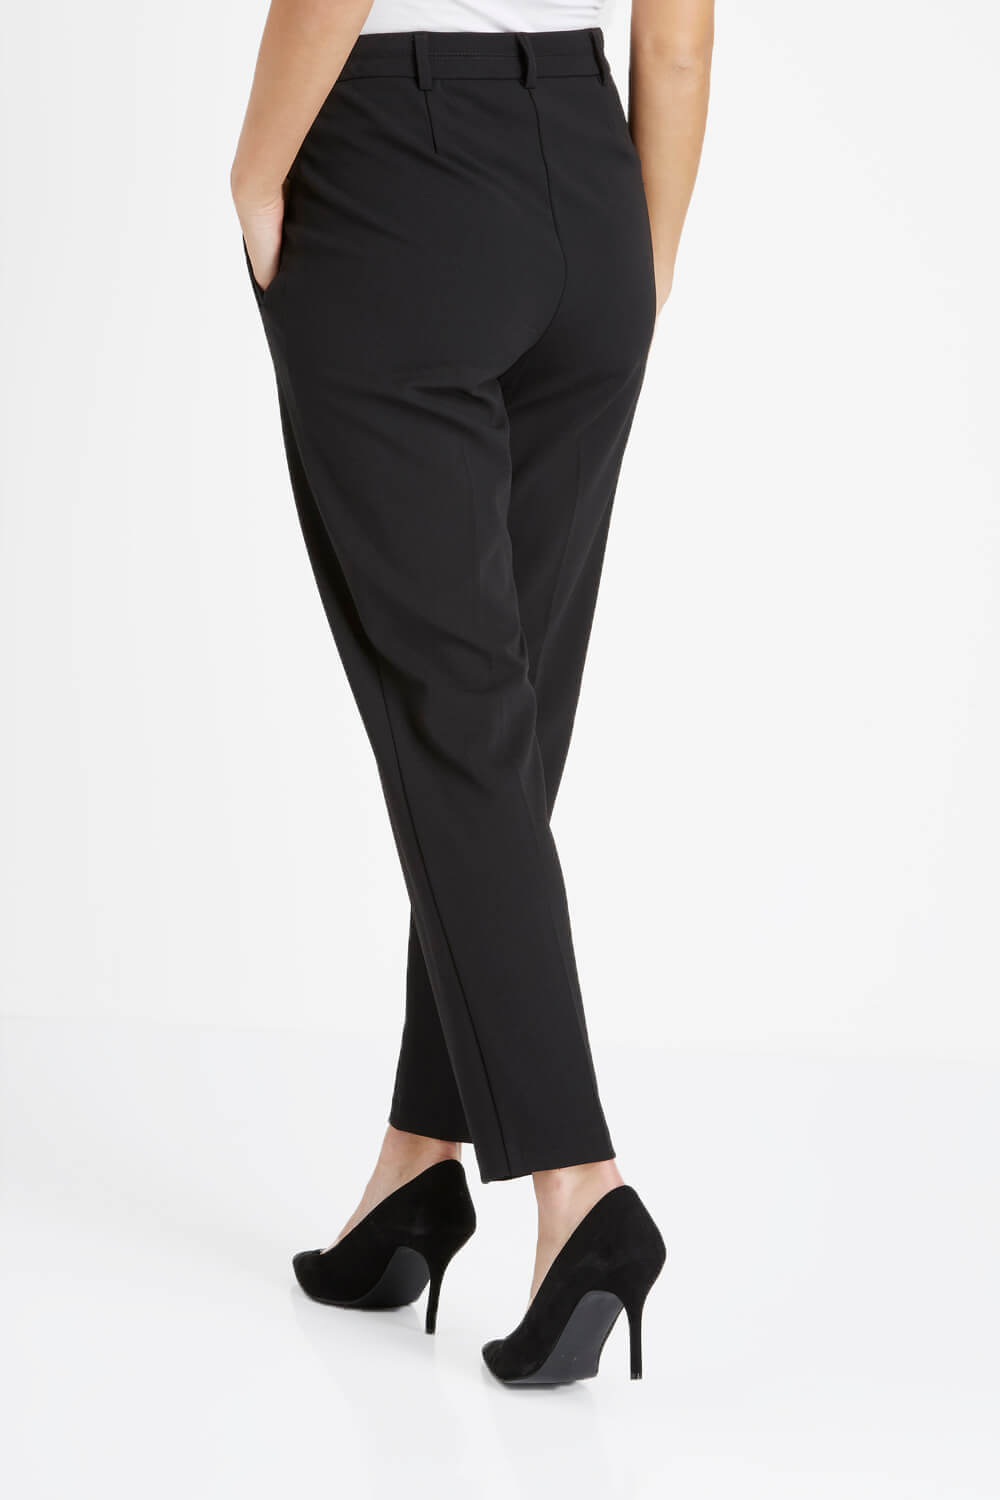 Black Tailored Straight Trouser, Image 2 of 5